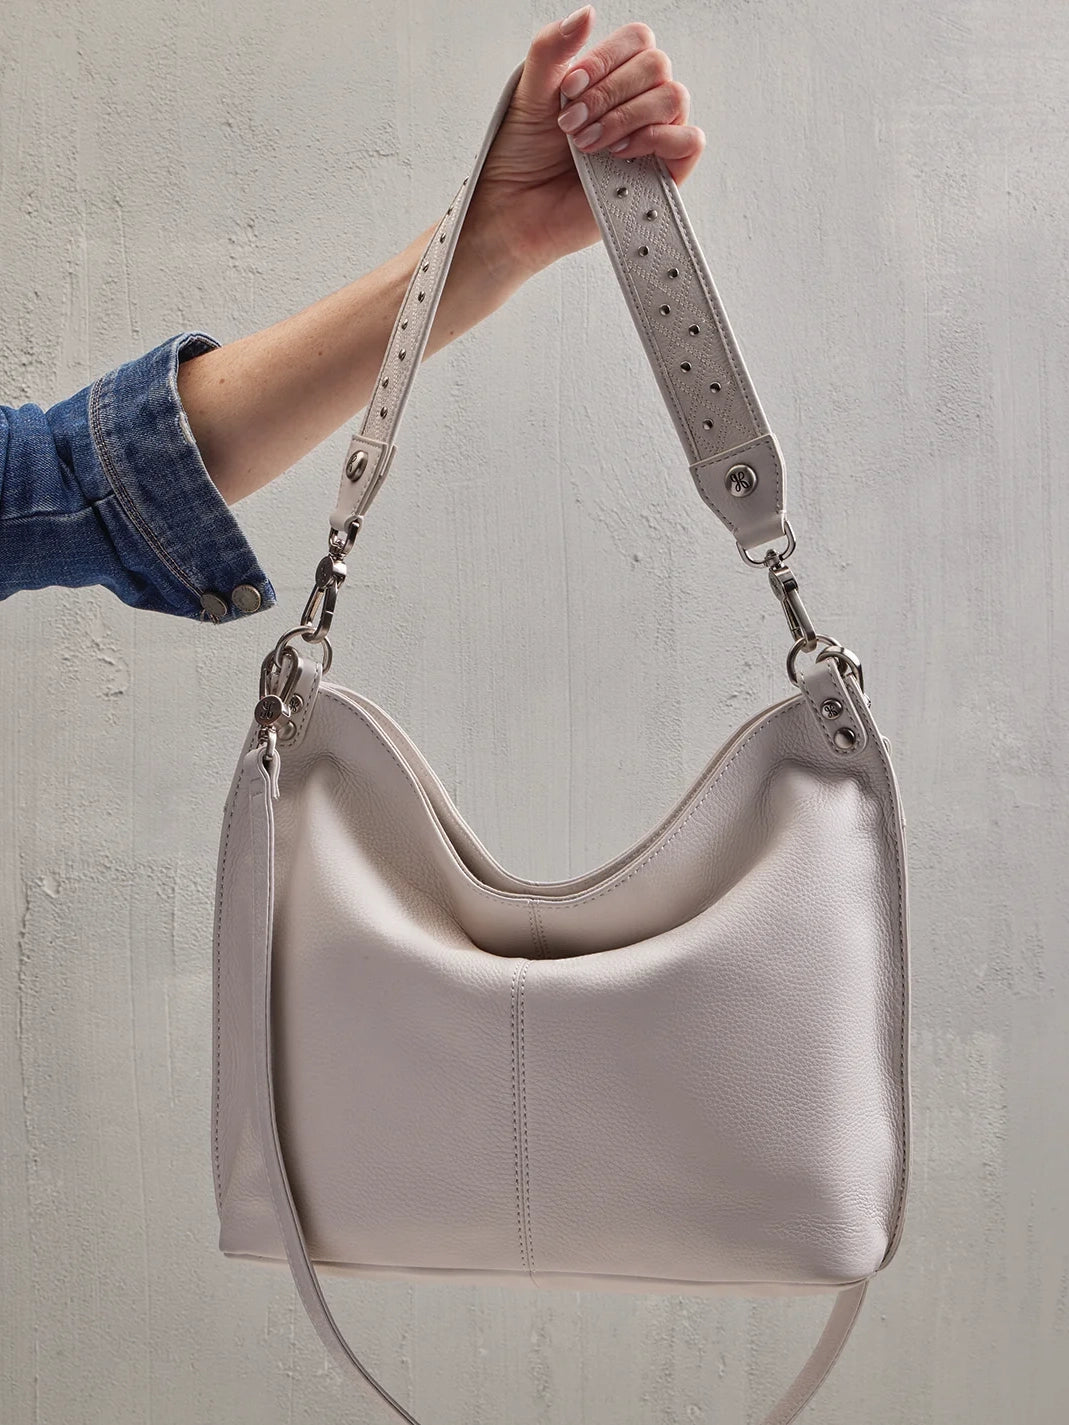 hobo pier studded shoulder crossbody pebbled leather in white-hanging view